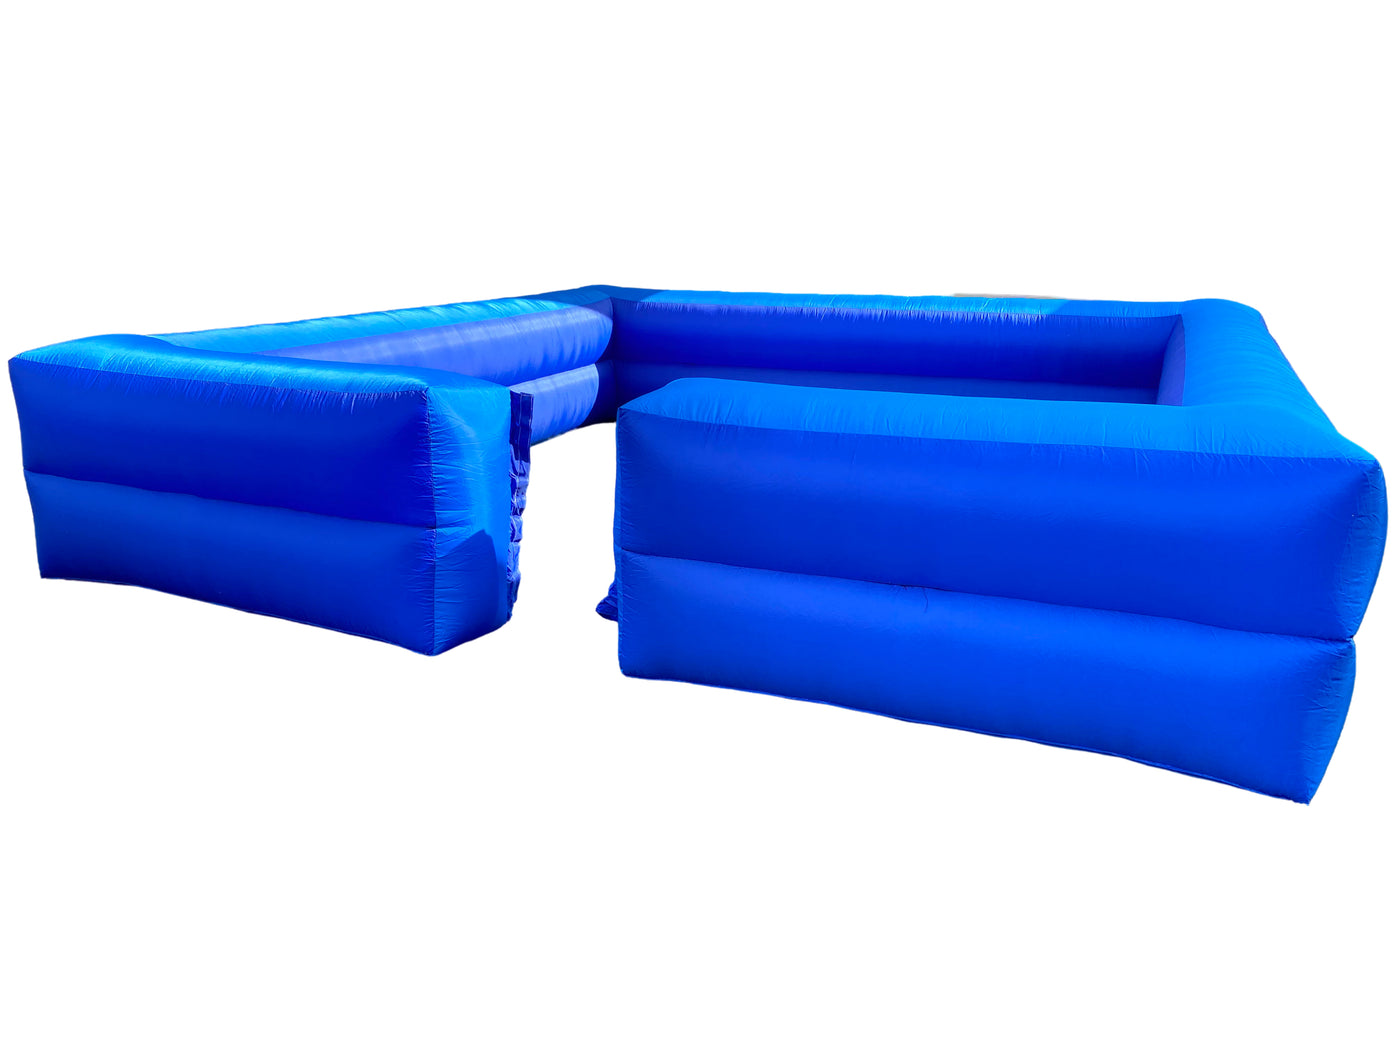 13 x 13 ft light weight foam containment pit - IAAPA week is 50% off